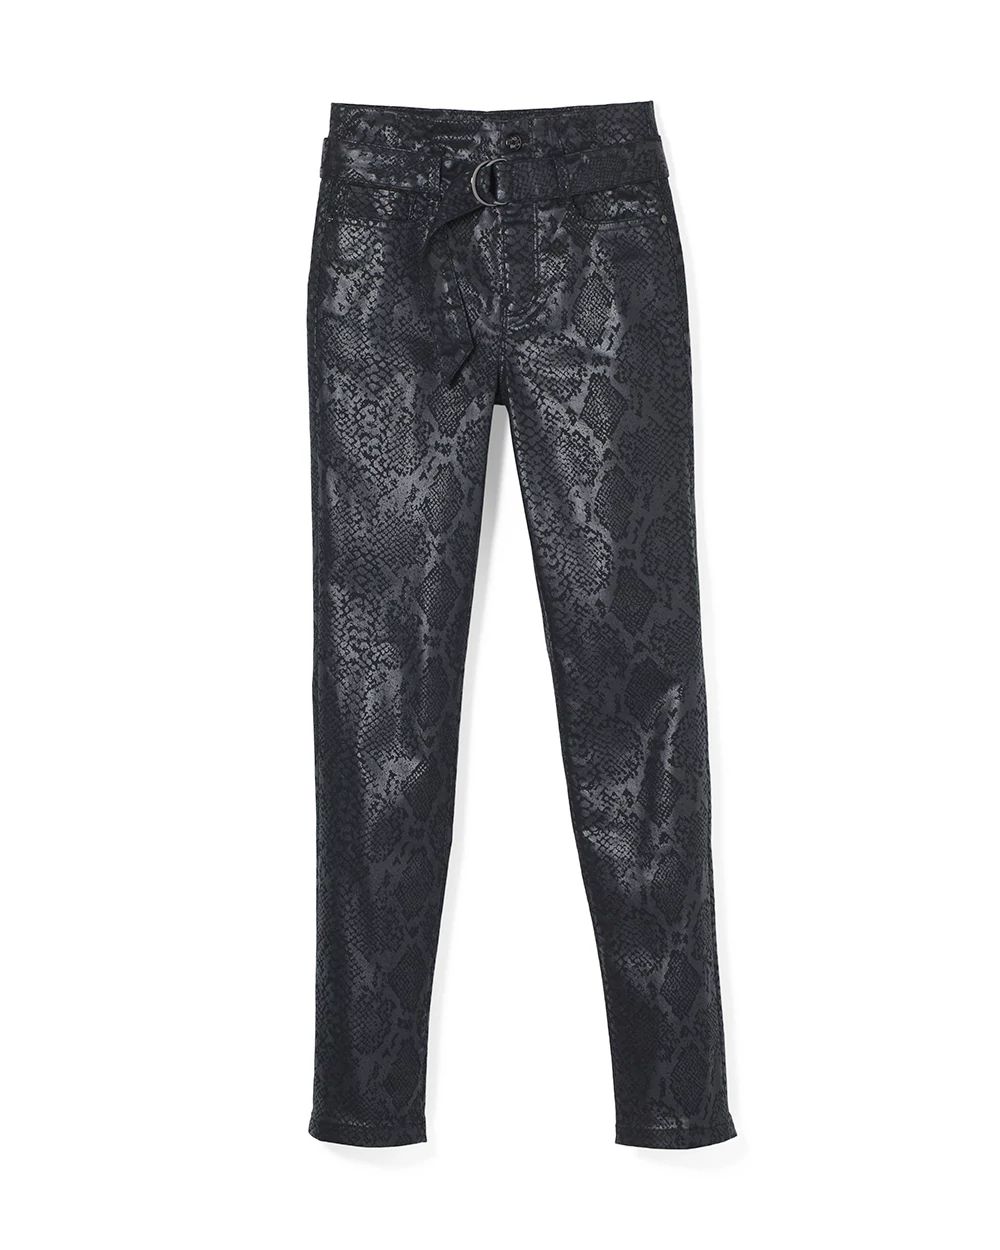 Extra High-Rise Snake Print Coated Slim Ankle Jeans click to view larger image.